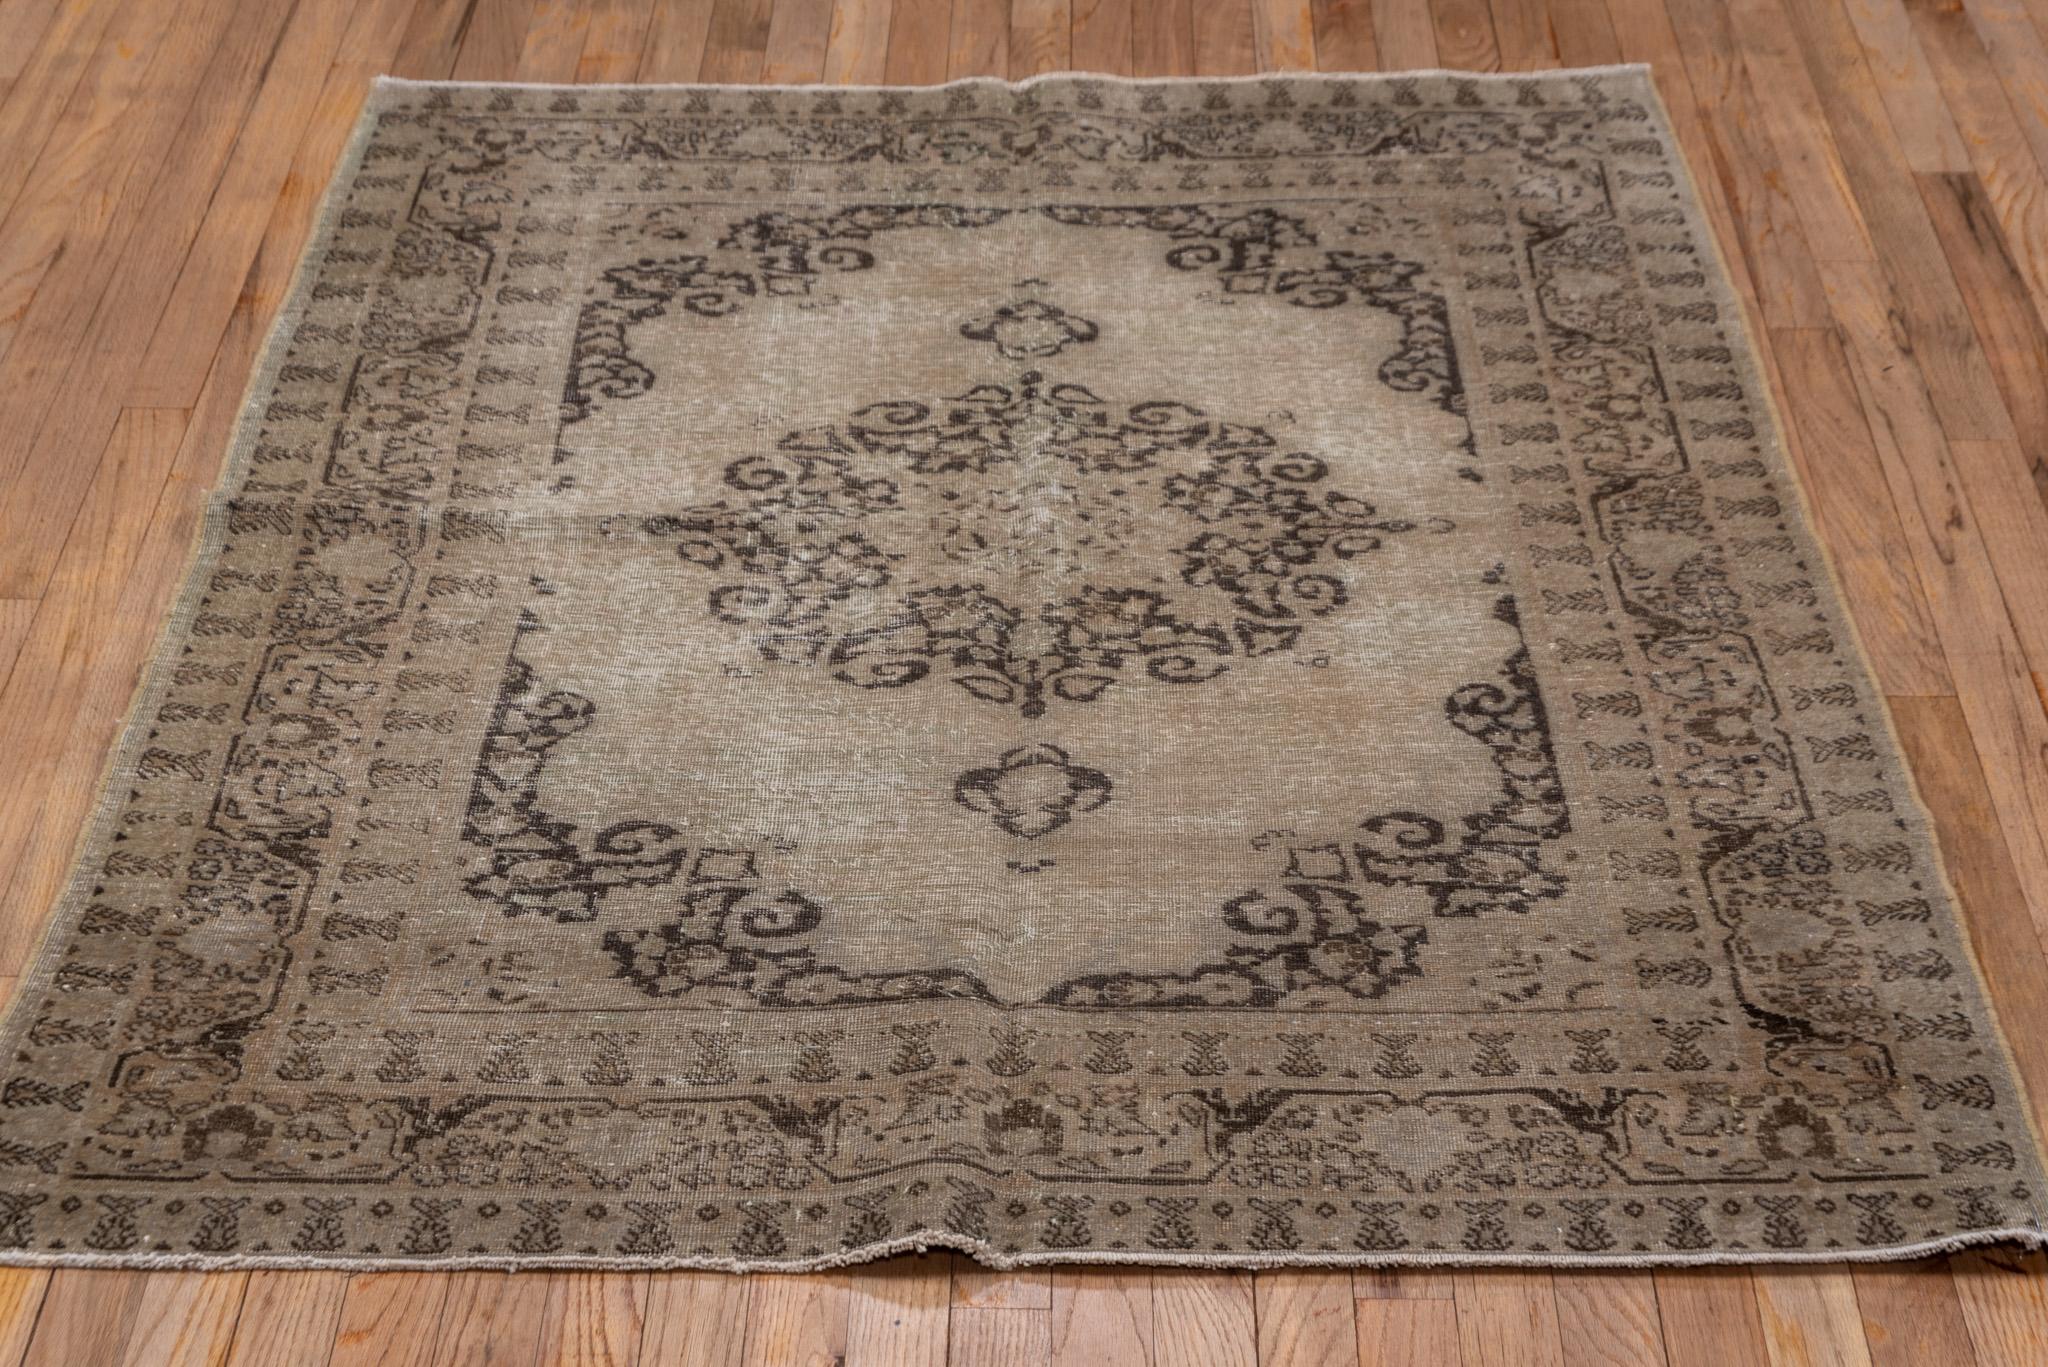 A Tabriz Rug circa 1930. Hand Knotted and made of 100% wool yarn.